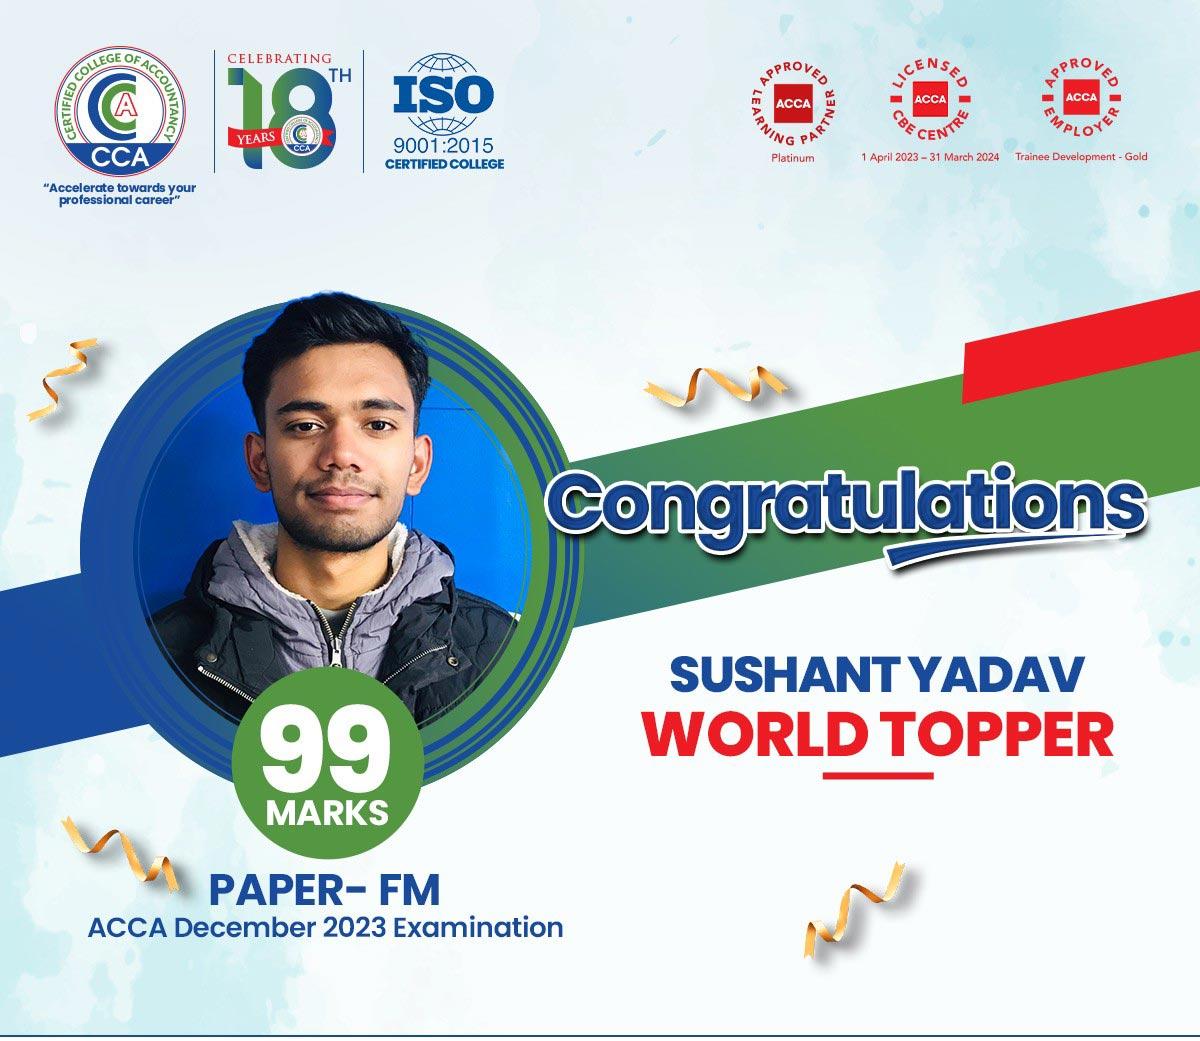 Sushant Yadav Nepal ACCA Student Tops Global Chart with 99 Marks